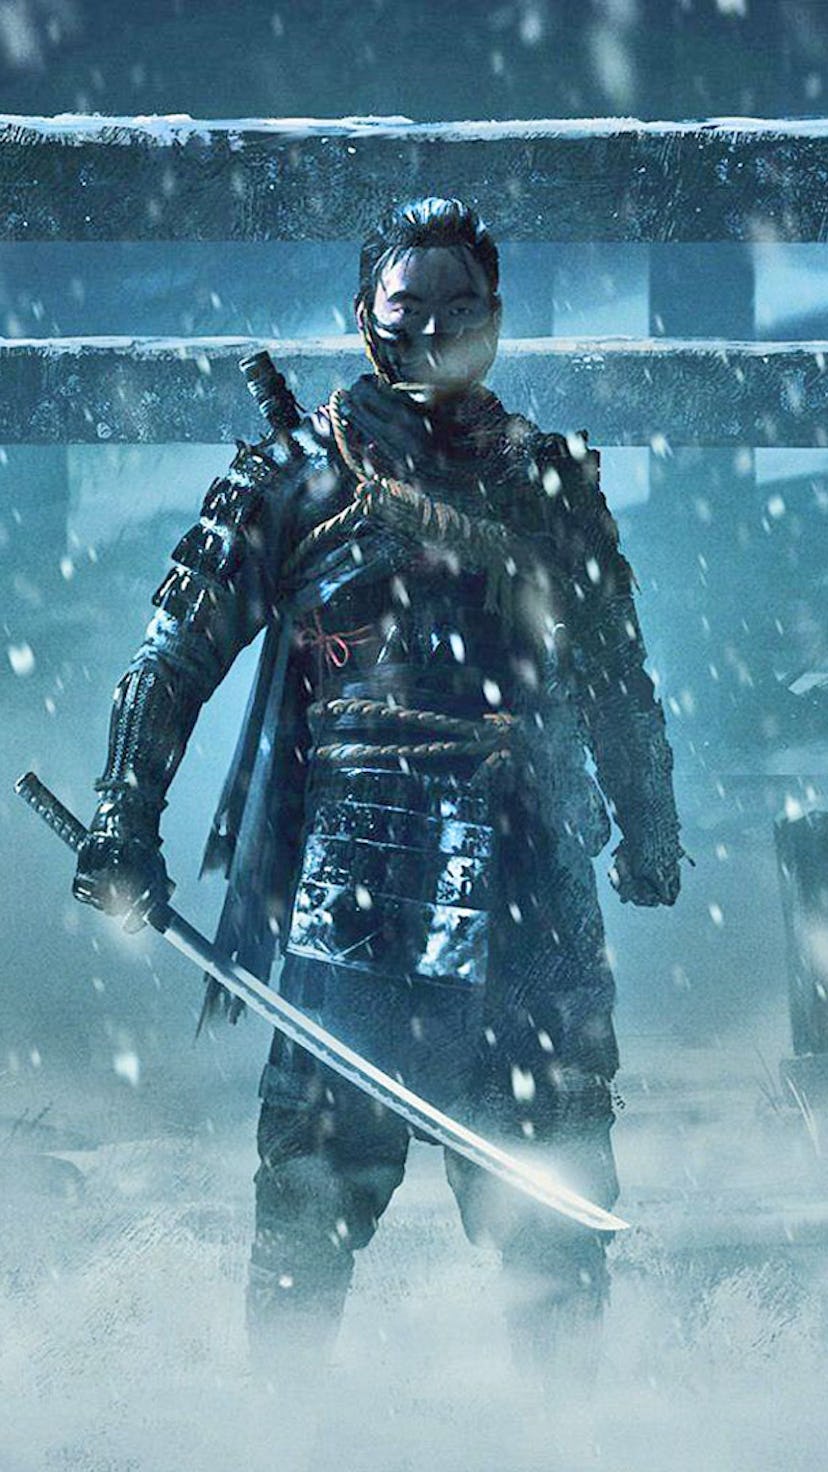 A still from Ghost Of Tsushima with the main character standing in the snow with a katana